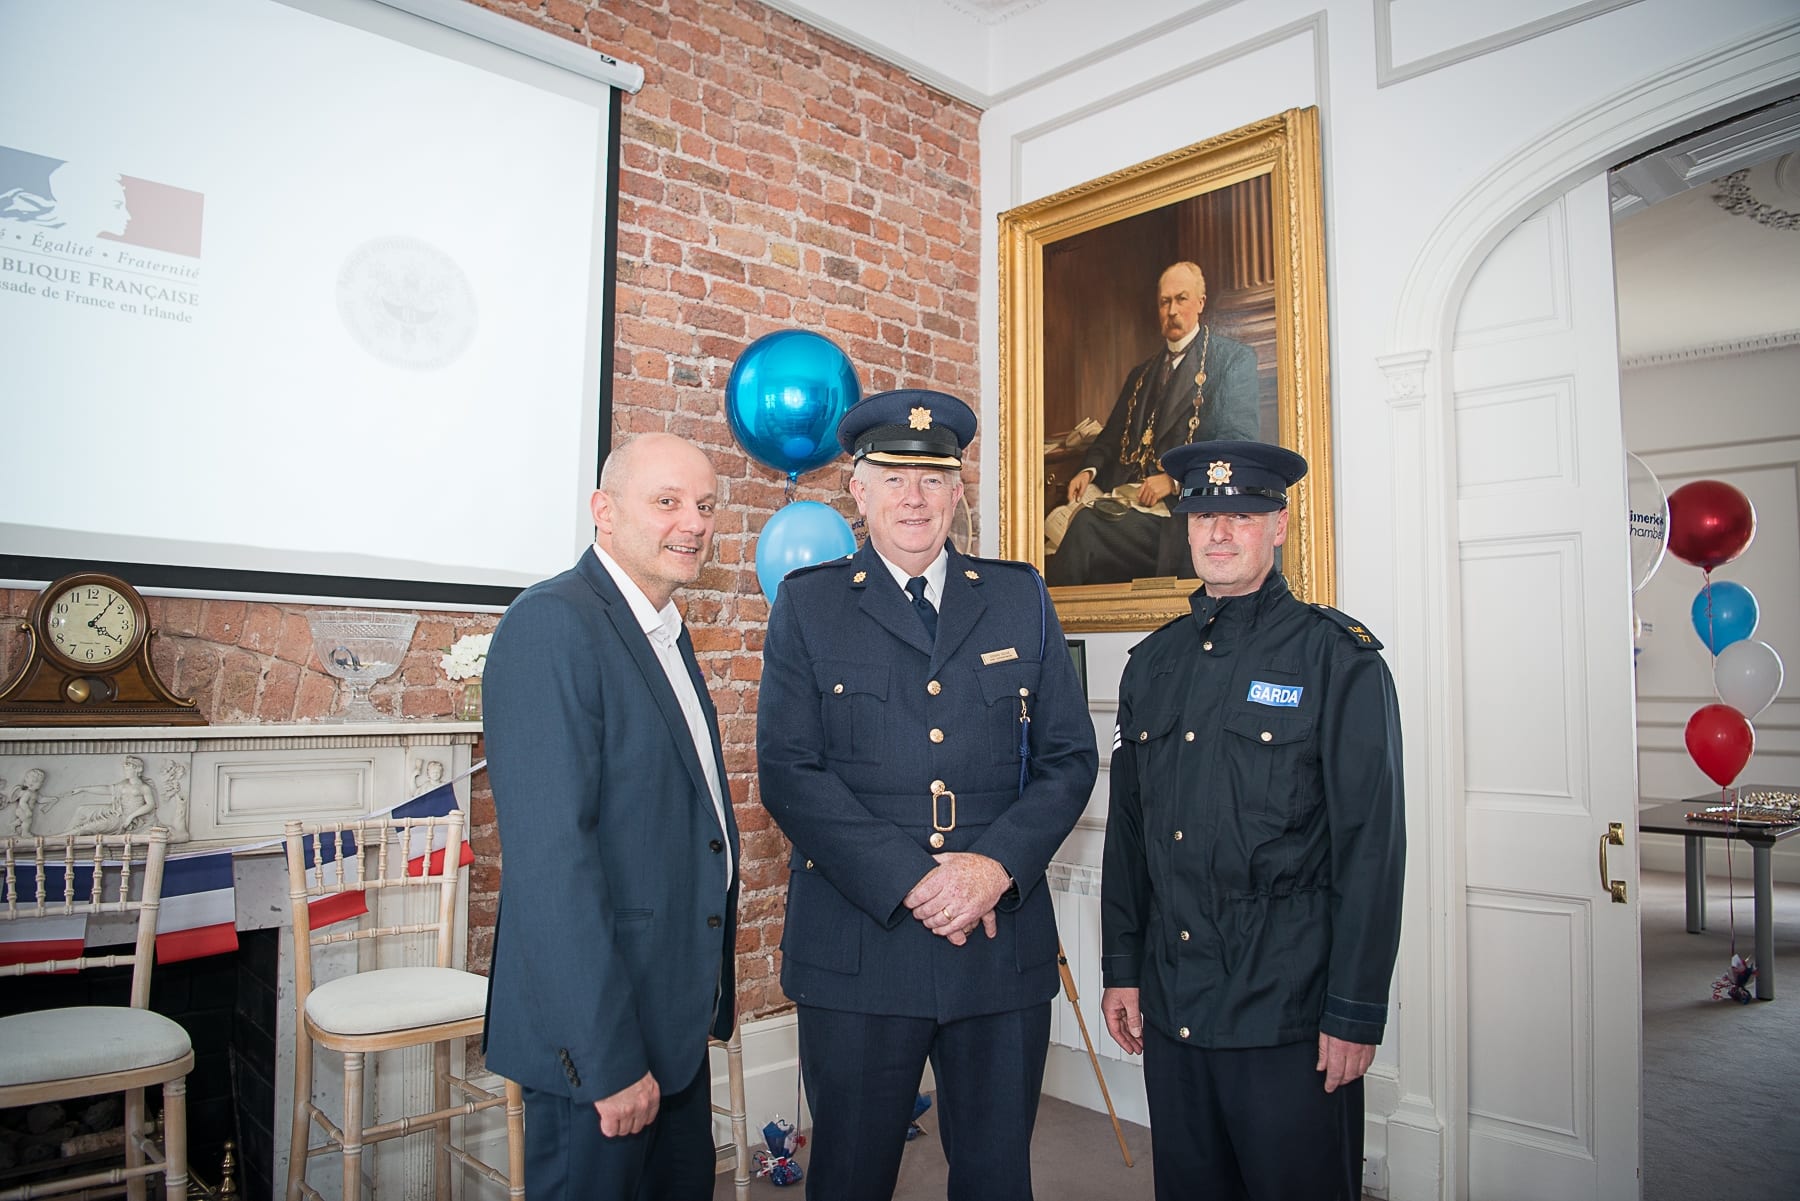 no repro fee- 
From Left to Right:  French Embassy Event which took place on the 18th June in the Limerick Chamber Boardroom:  Dominique Le Meur - UL, Chief Superintendent Gerard Roche - Henry Street, Sergent Andrew O’Riordan - Henry Street. 
Photo by Morning Star Photography